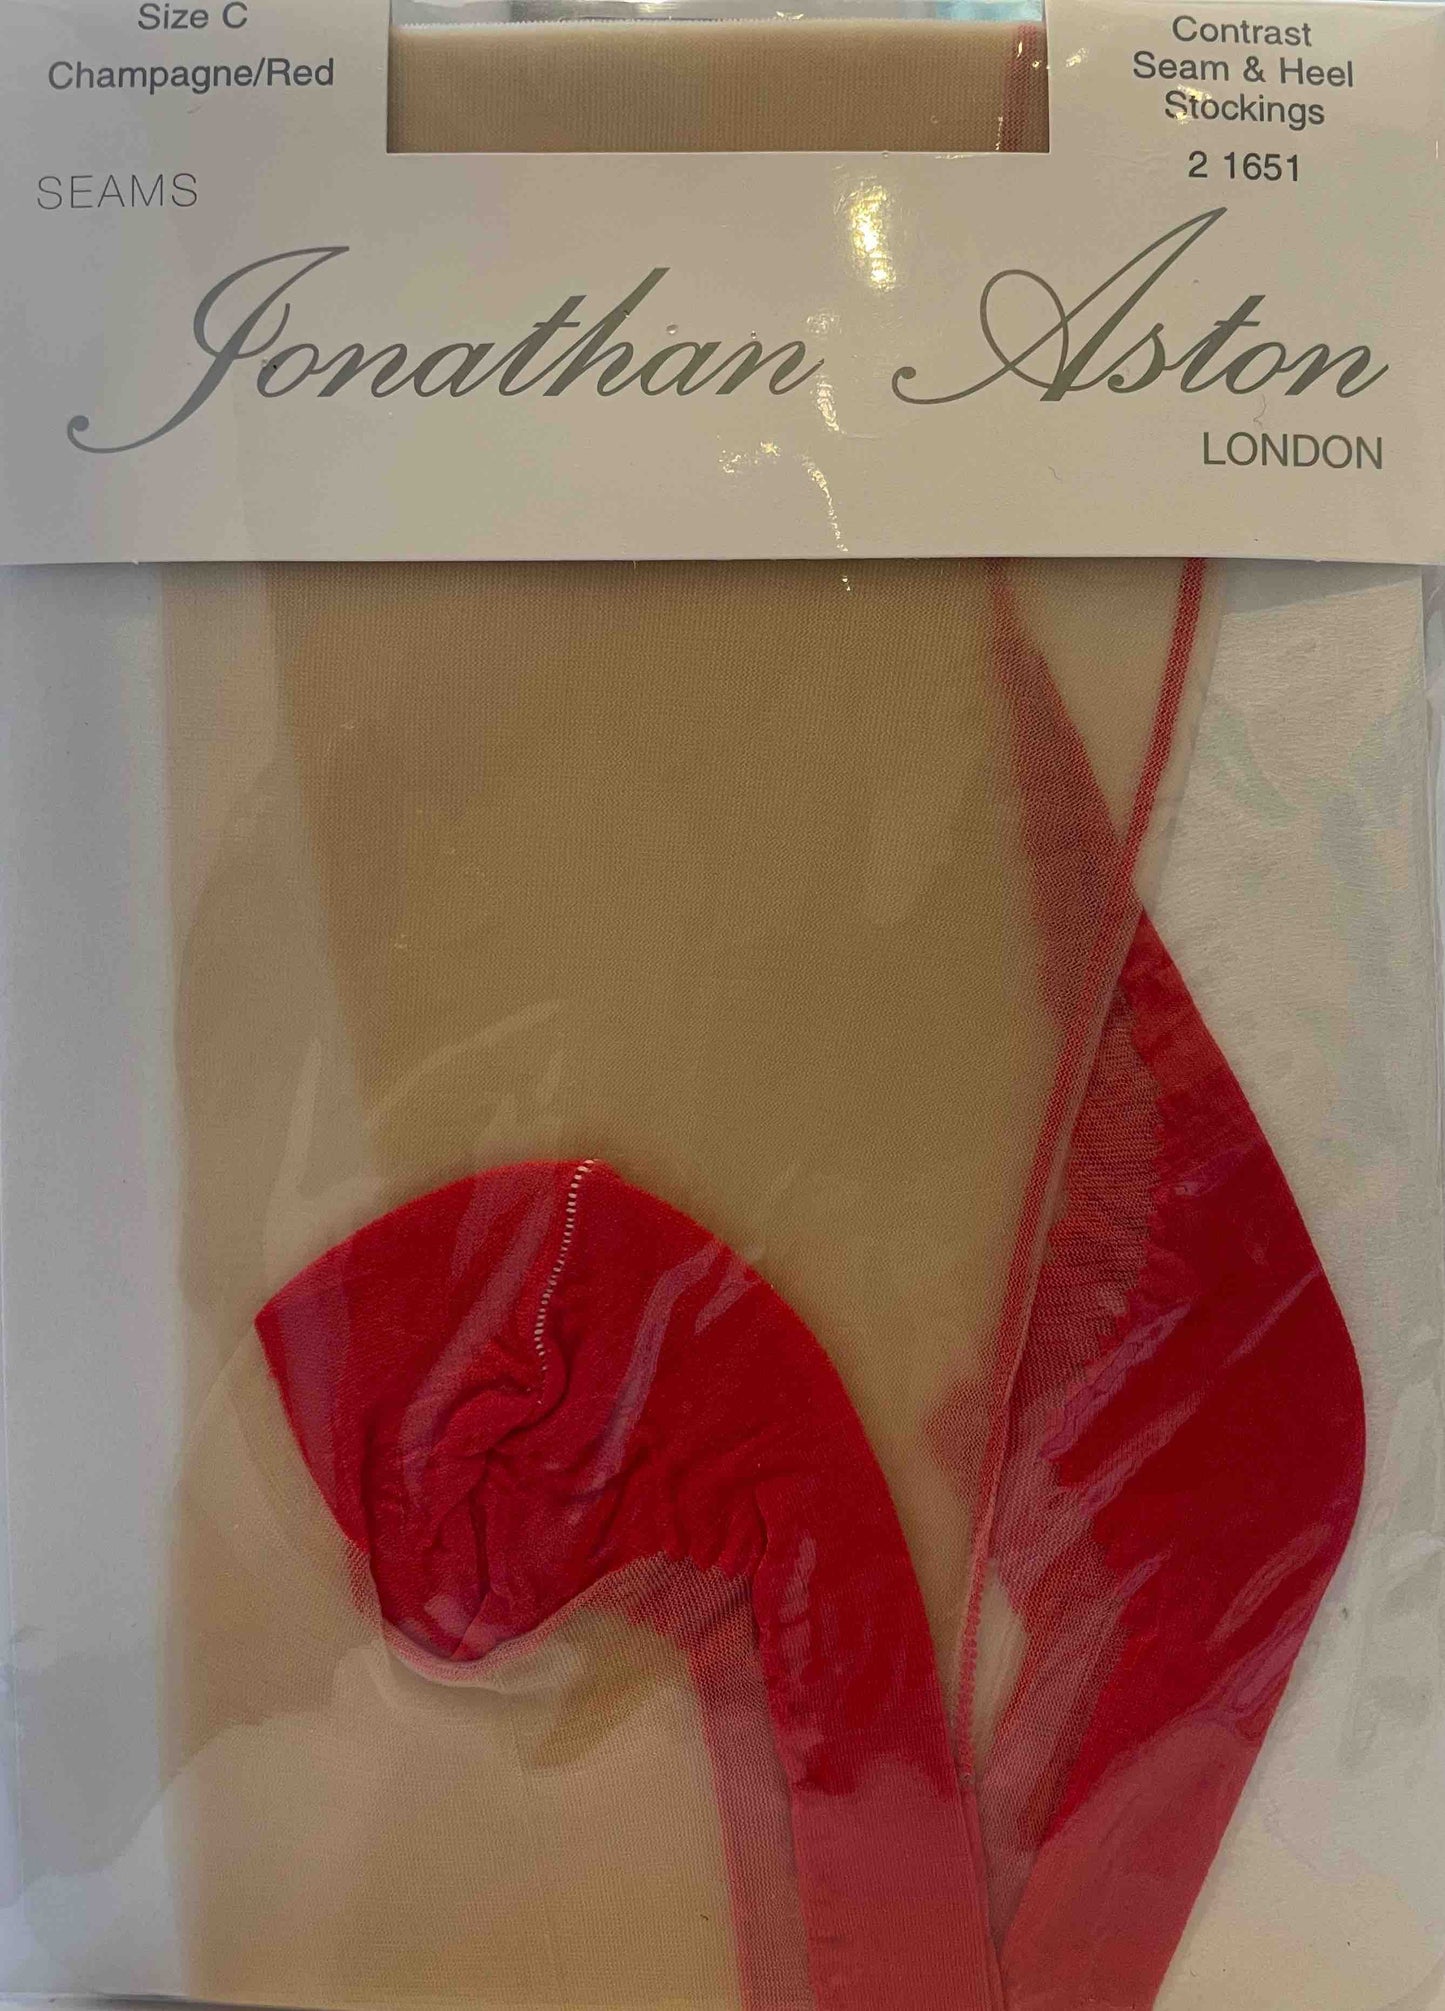 Champagne colored seamed stockings with red seam